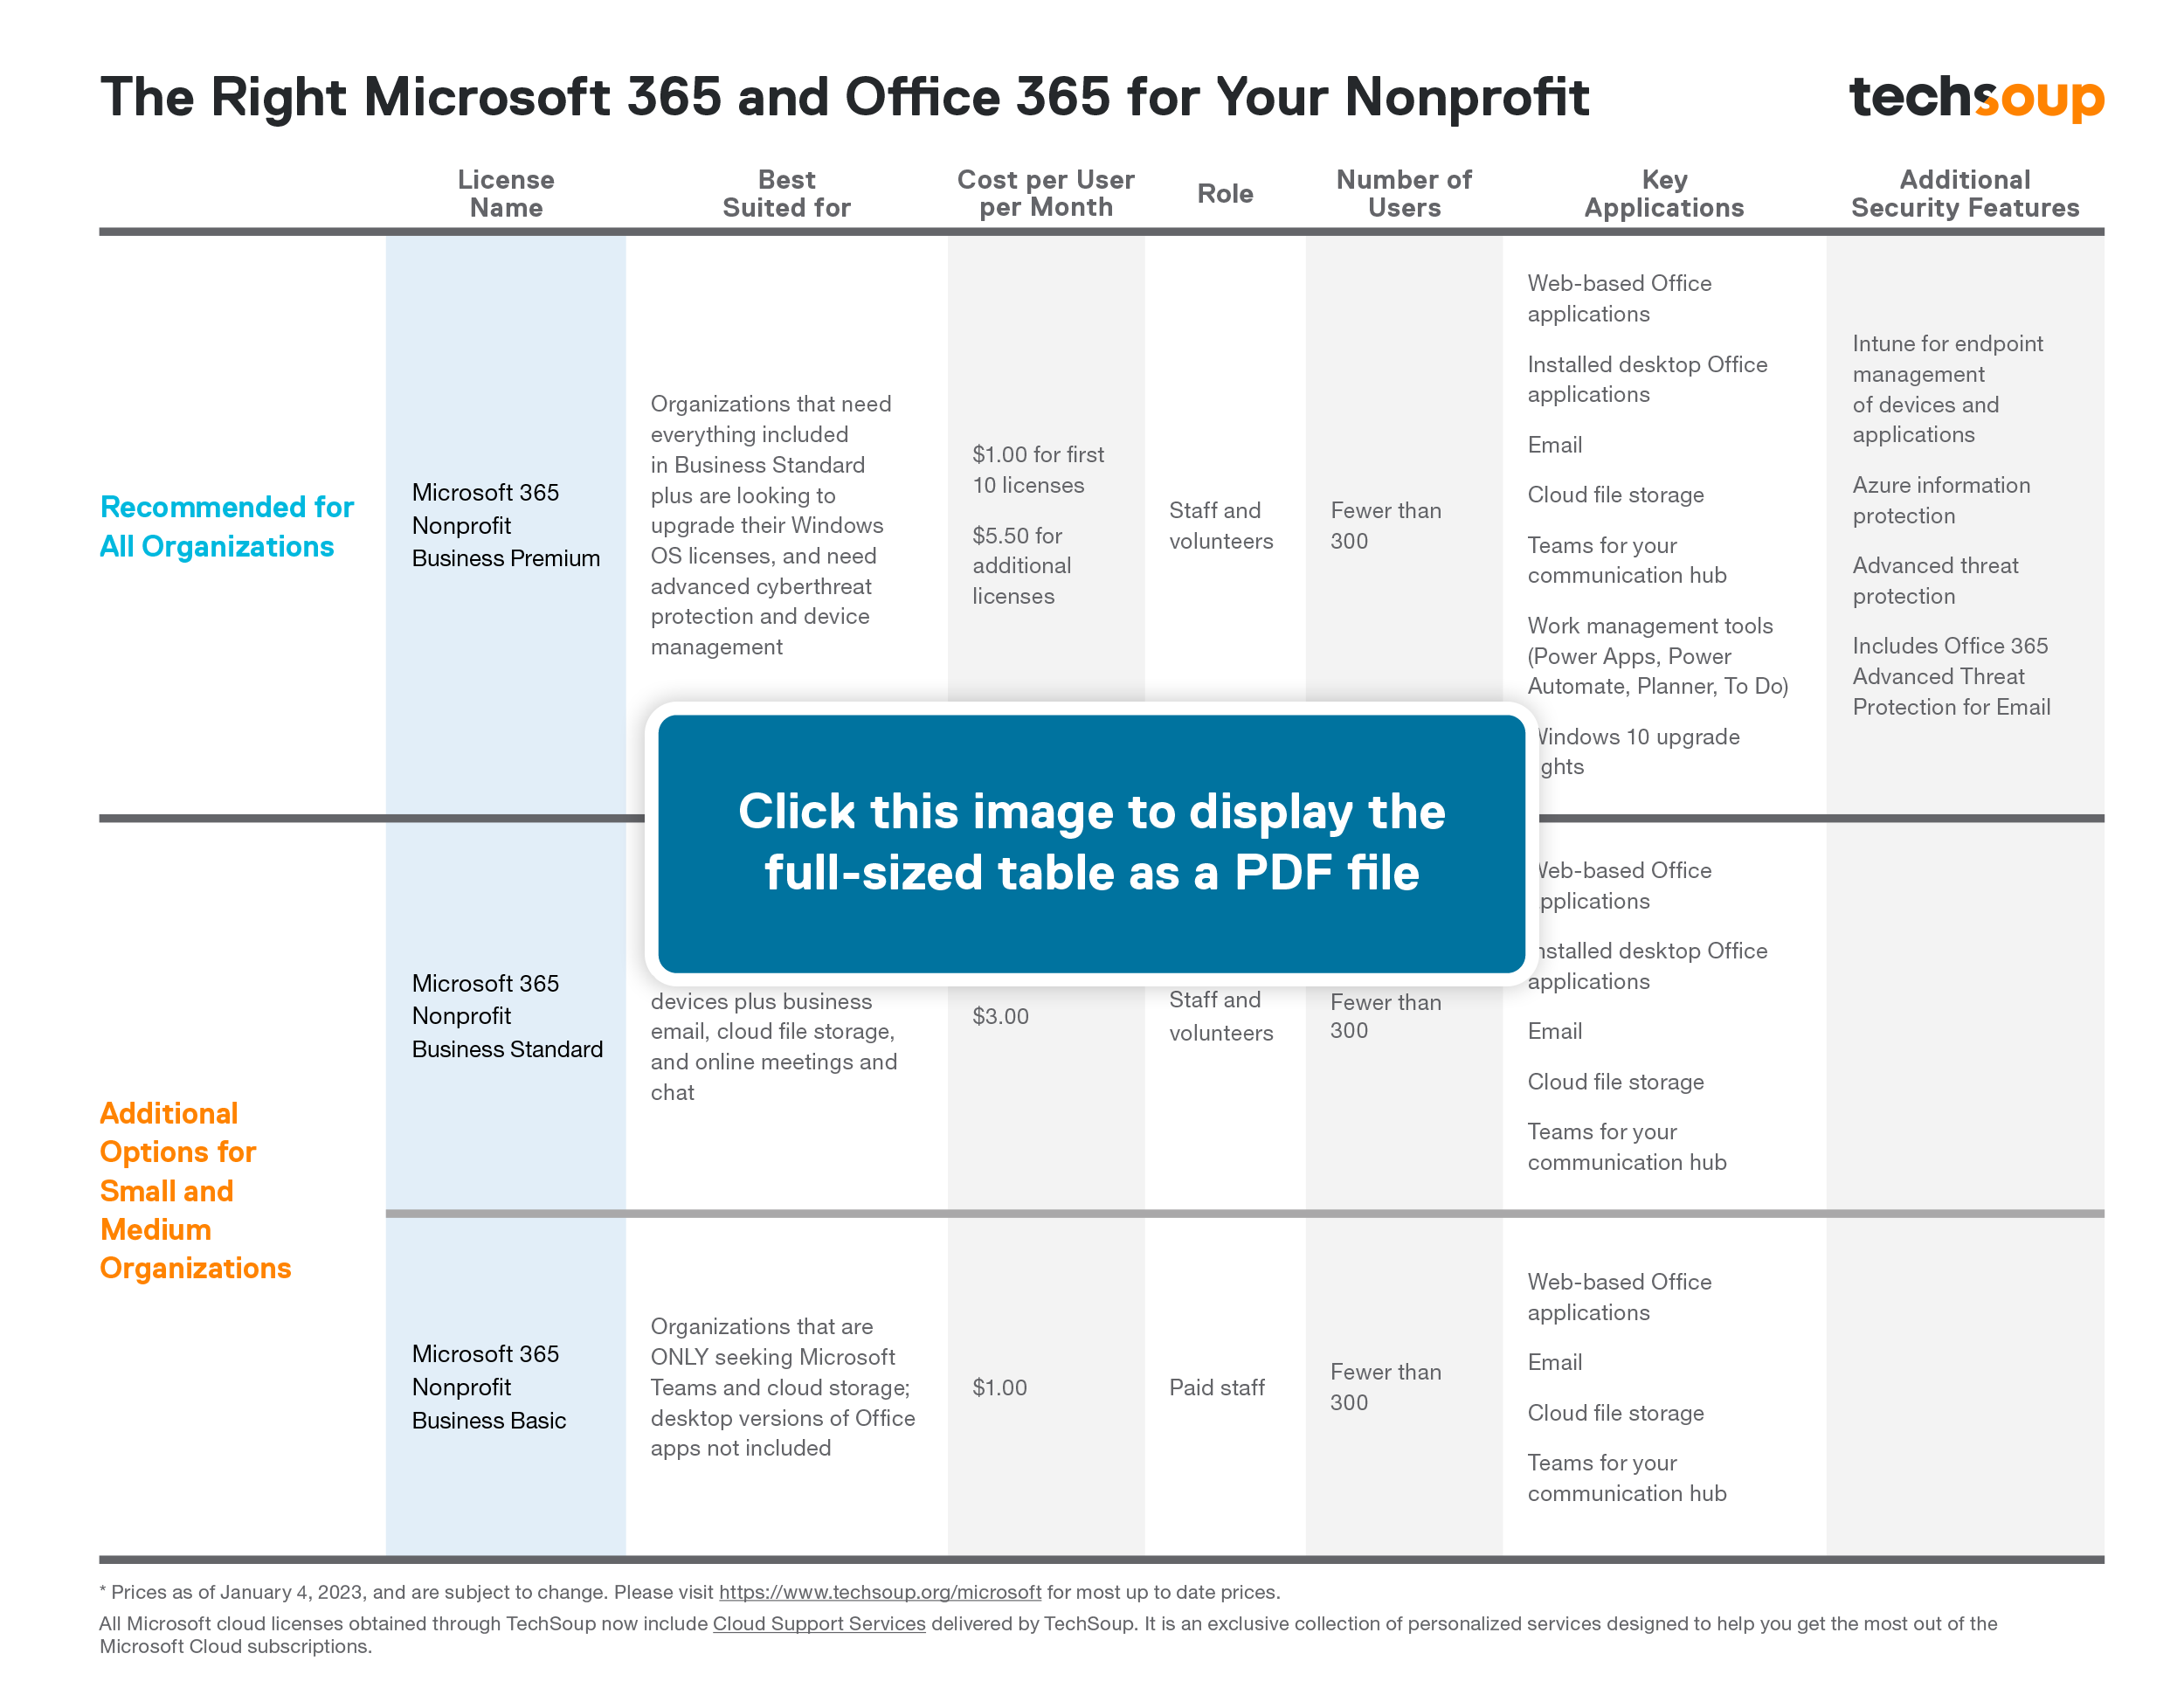 What You Need to Know About Microsoft 365 and Office 365 Nonprofit Offers